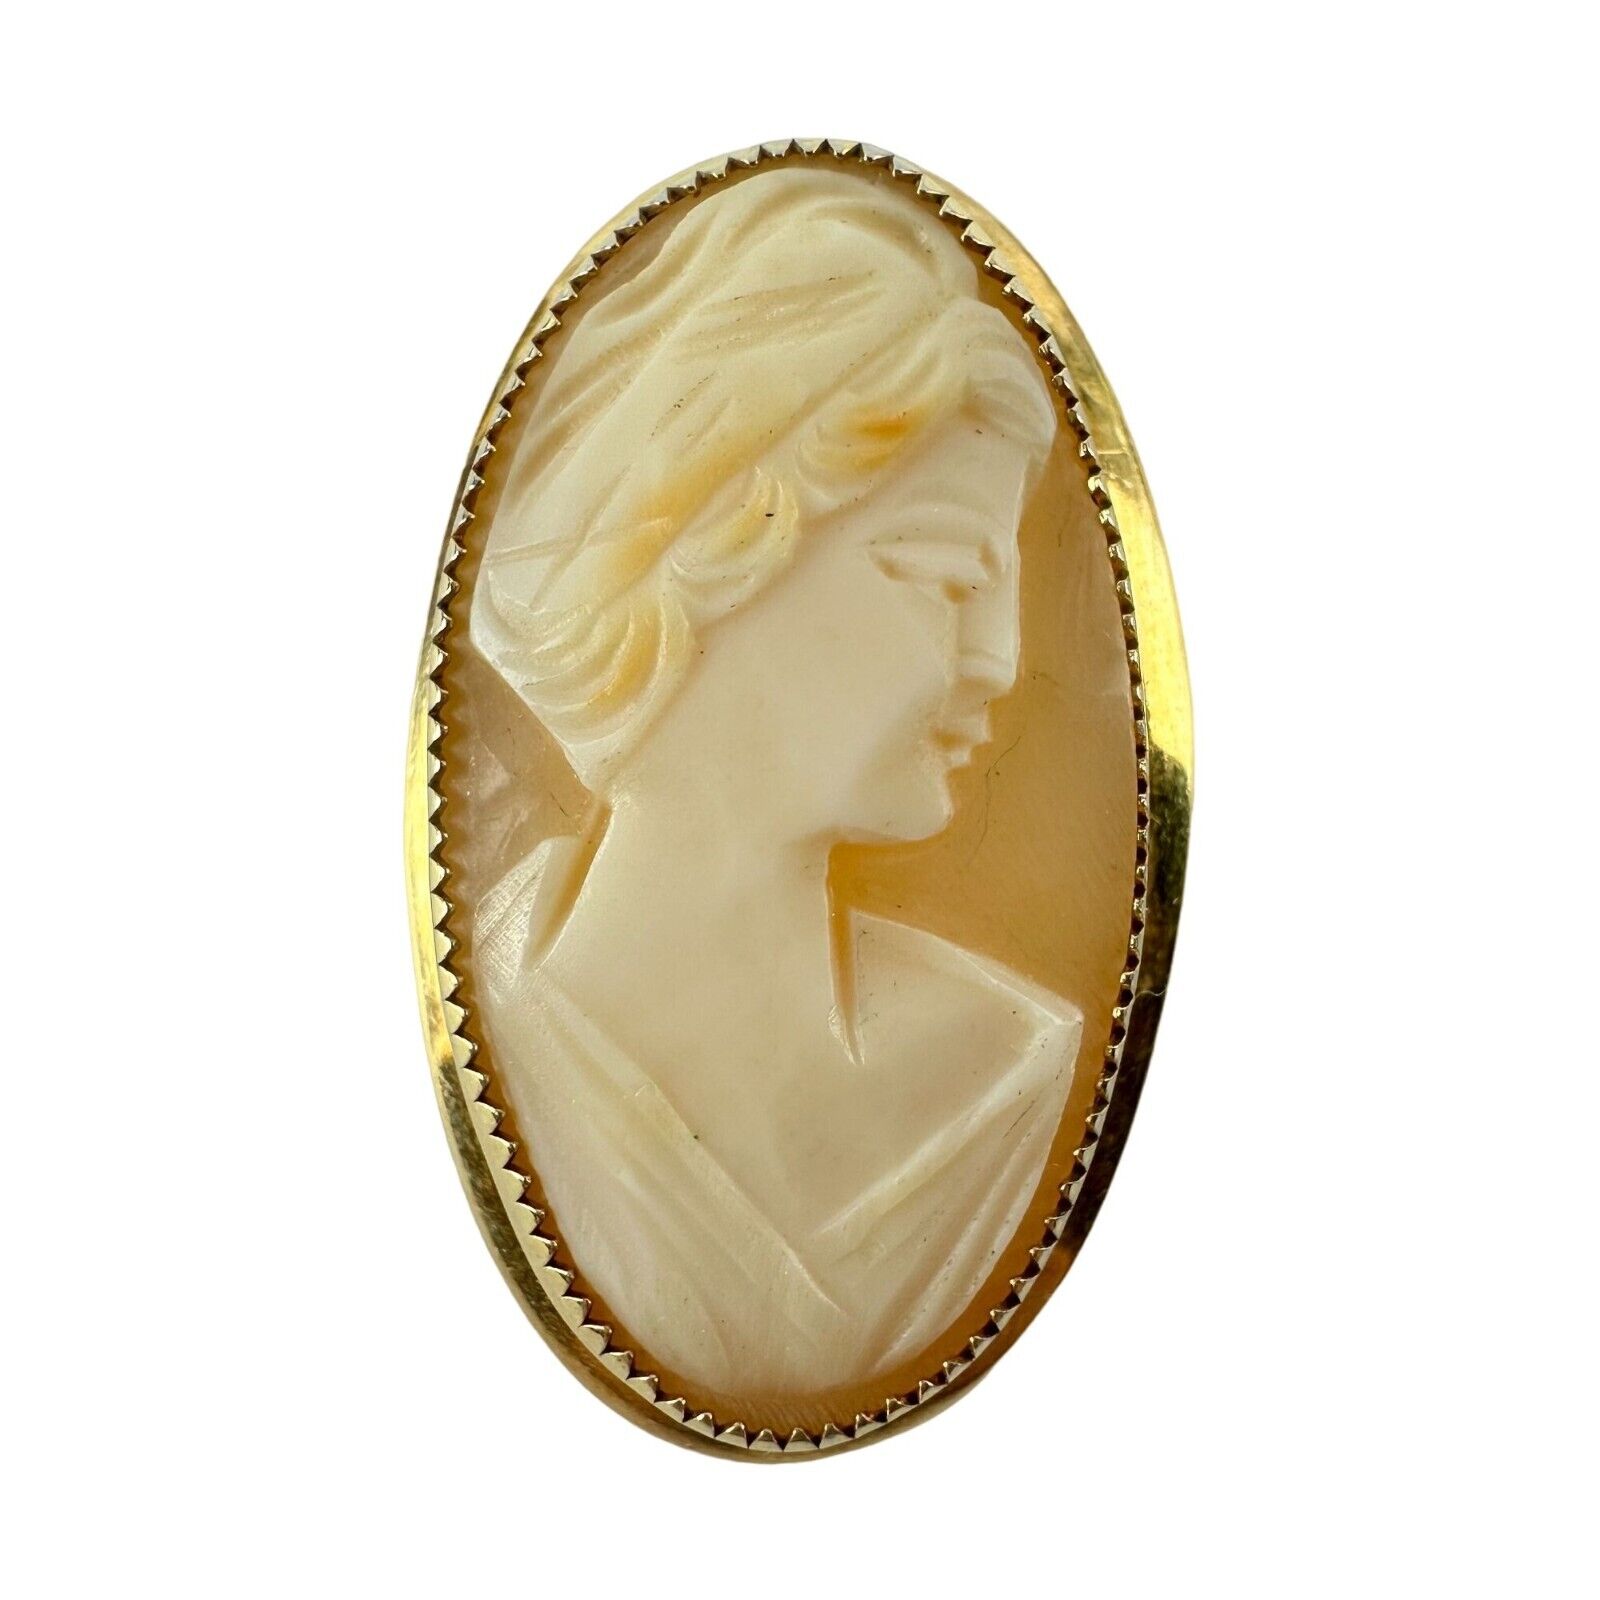 Catamore 12k Gold Filled Shell Cameo Brooch Cameo